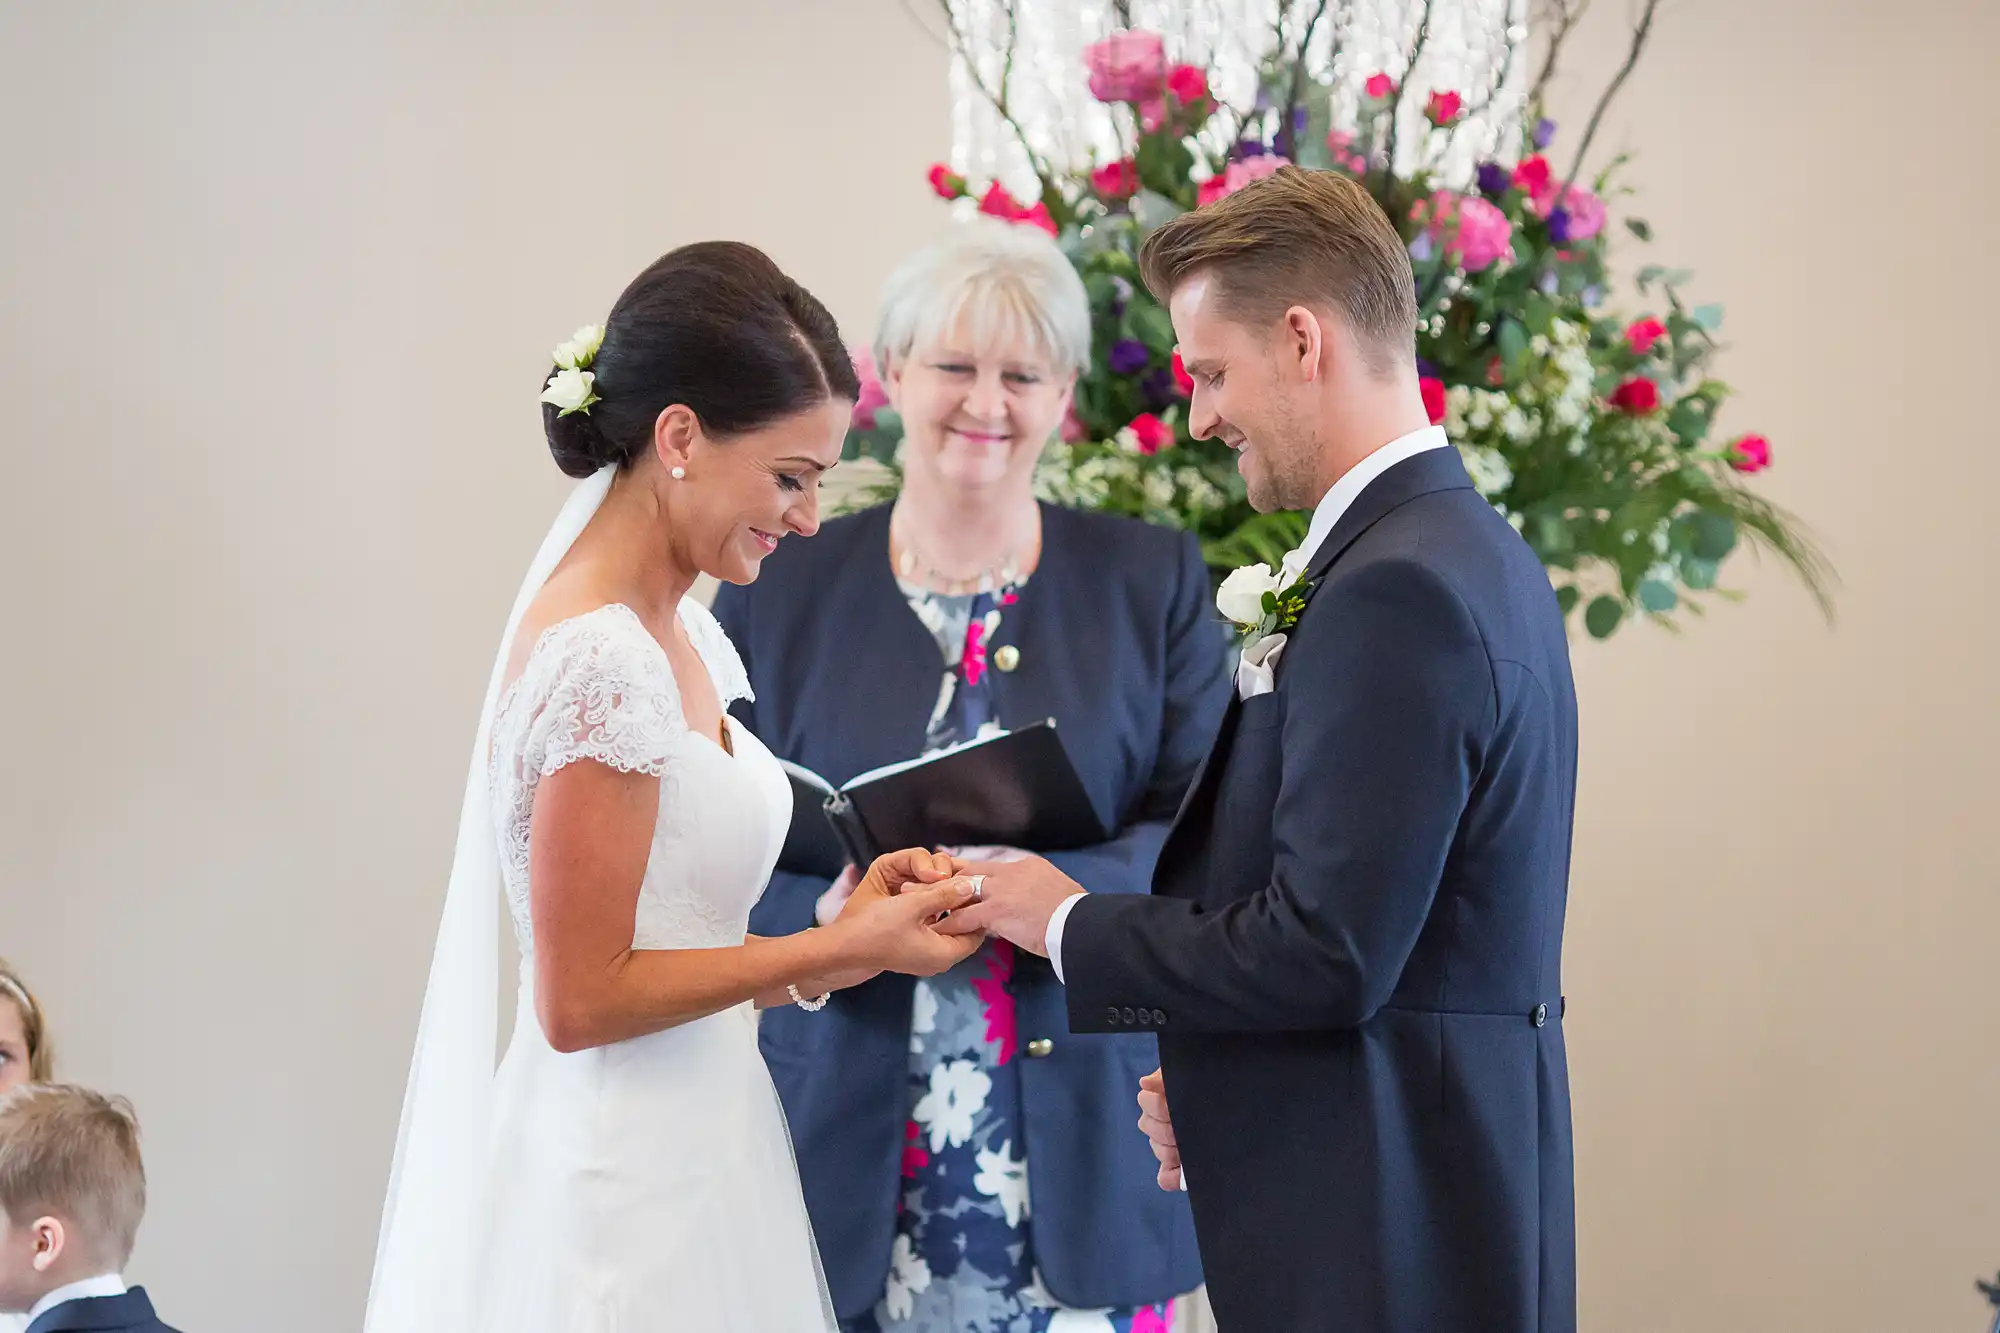 Bride and groom exchanging rings during a wedding ceremony, with an officiant smiling in the background.